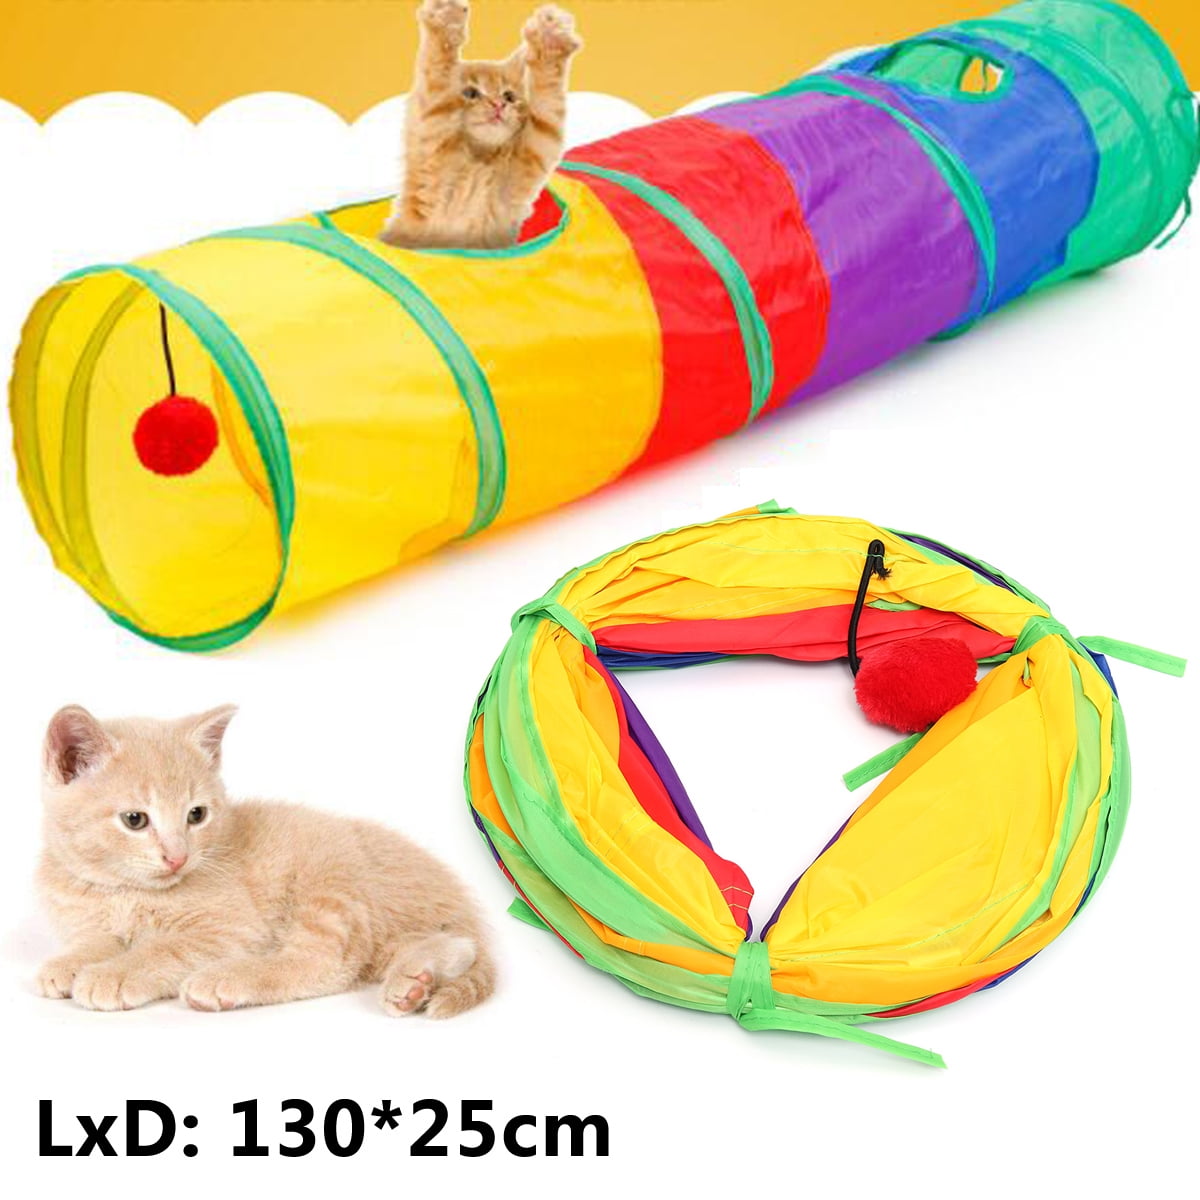 Fun Run Crinkle Play Tunnels for Pets Kittens Rabbits MYIDEA Collapsible Cat Tunnel Tubes Toys 